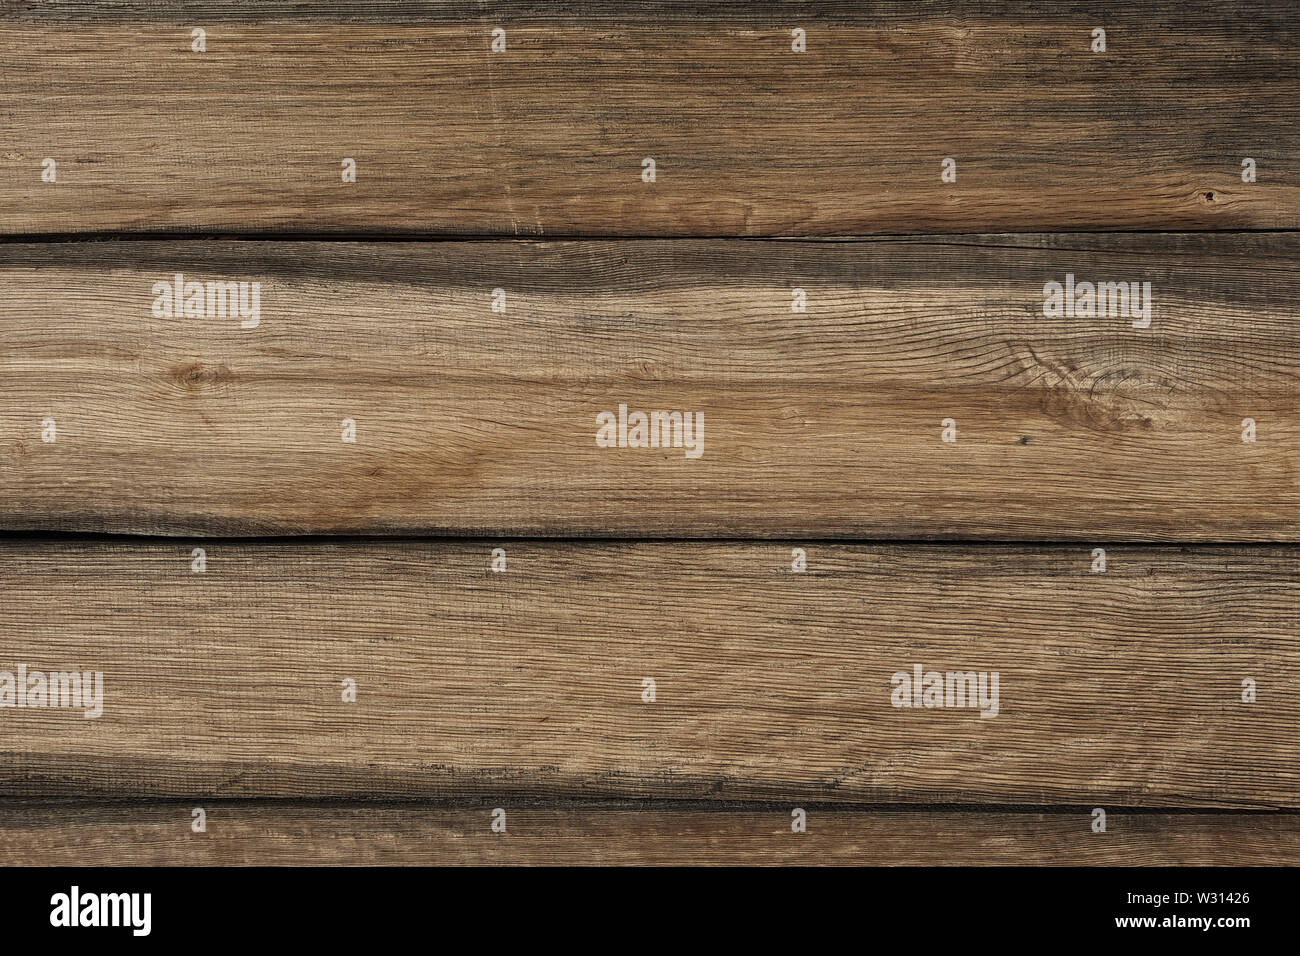 wood texture, abstract wooden background Stock Photo